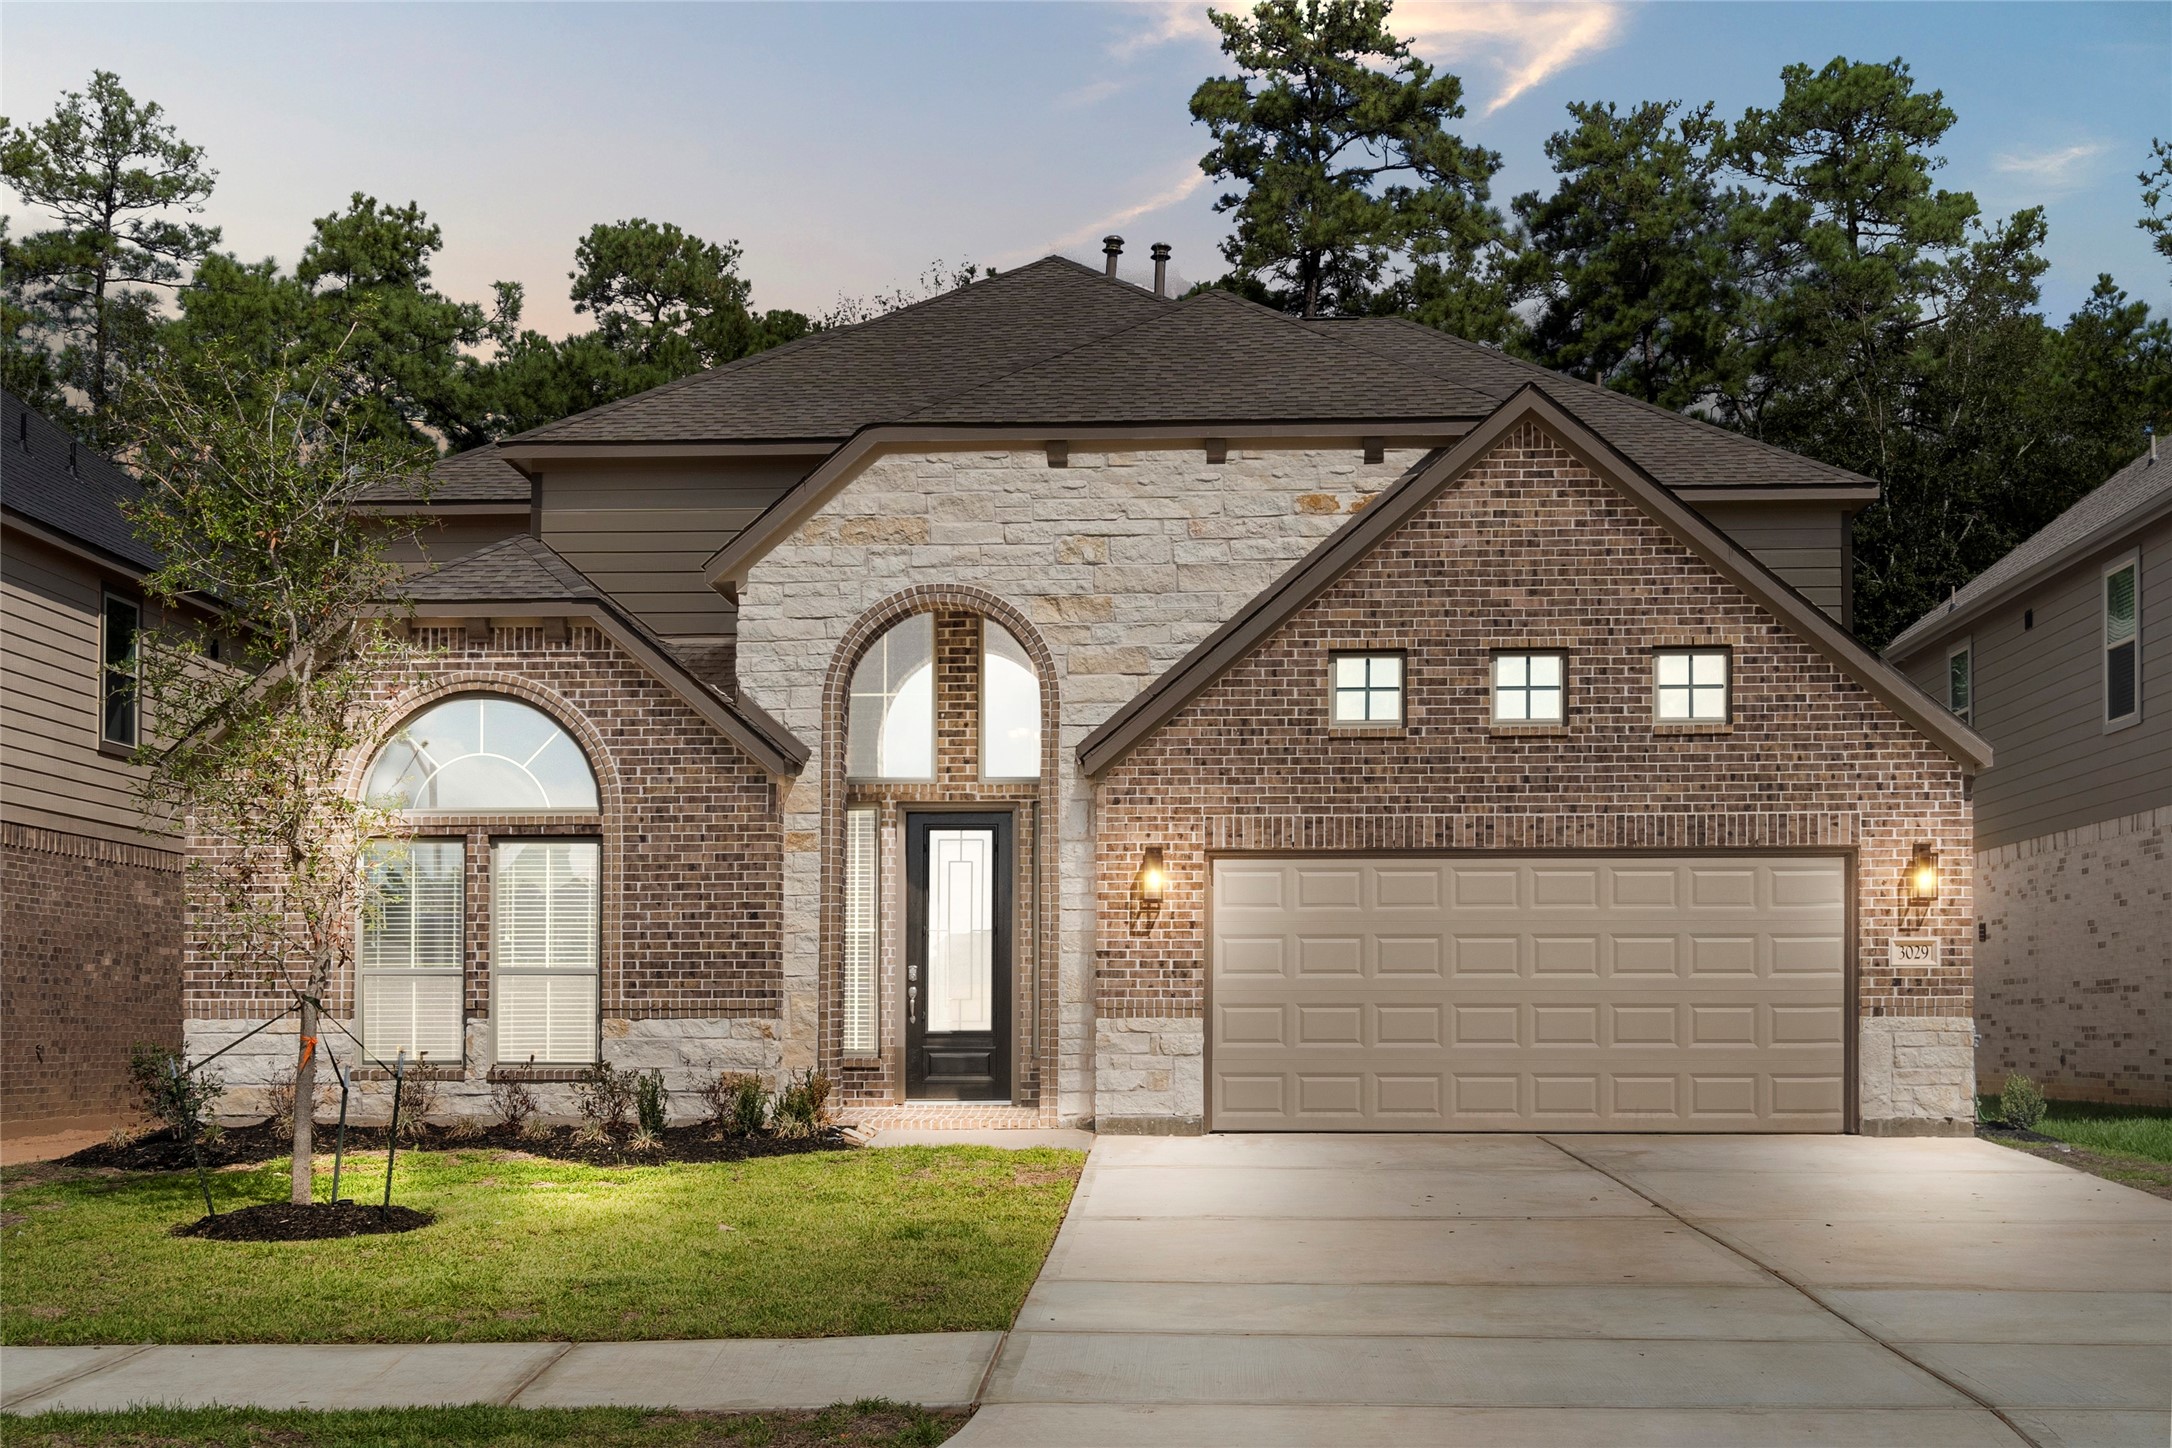 Welcome home to   3029 Mesquite Pod Trail located in Barton Creek Ranch and zoned to Conroe ISD.